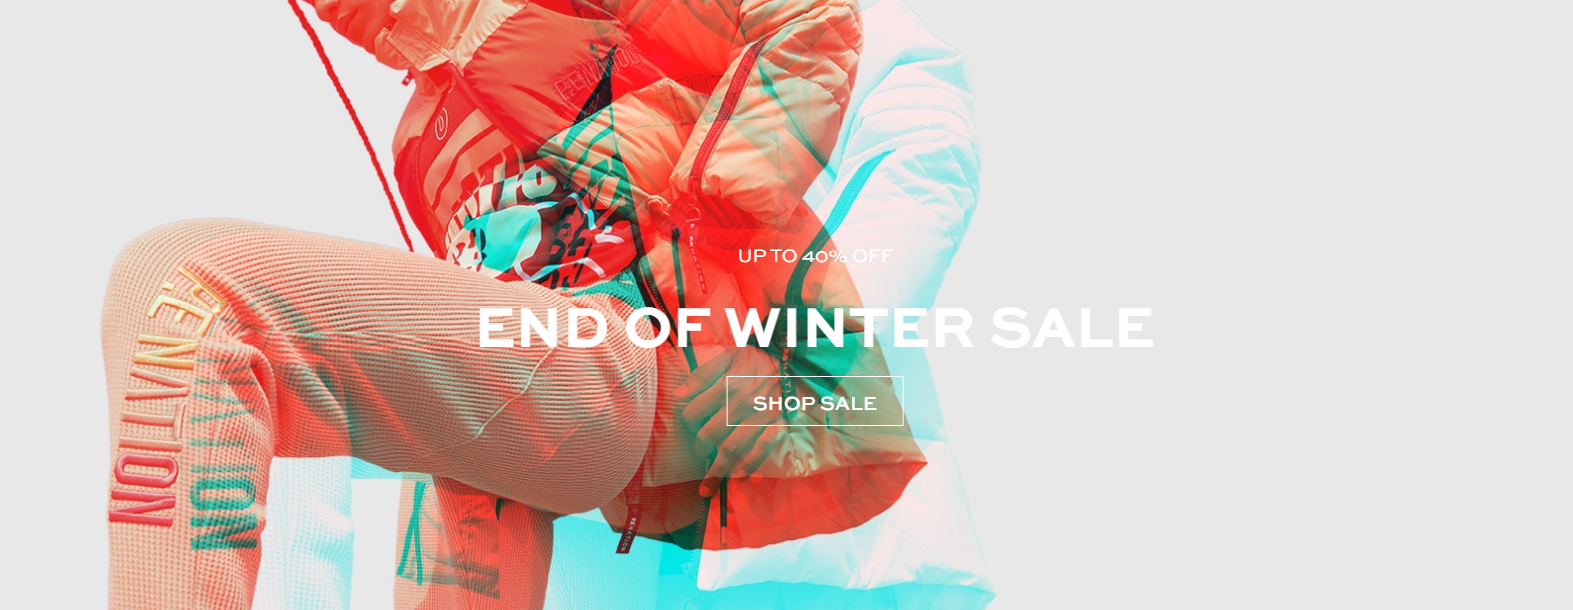 Up to 40% OFF on End of Winter sale